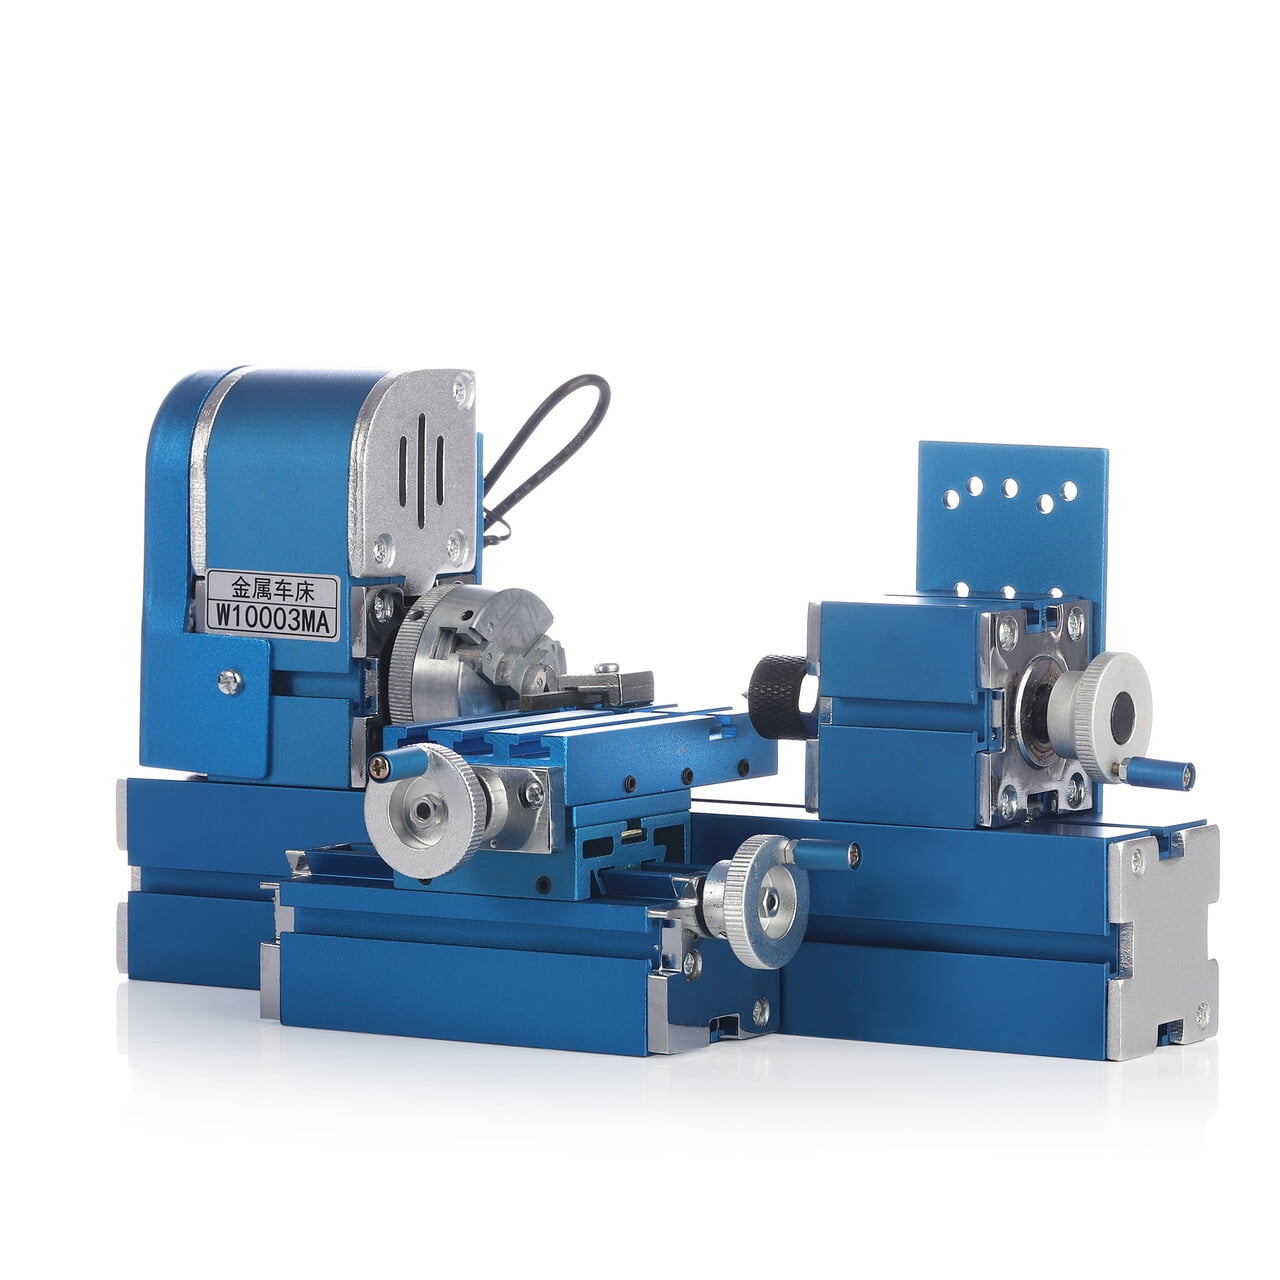 Details about   Mini Lathe Beads Machine Woodworking DIY Lathe Standard Set with Power DC 24V 